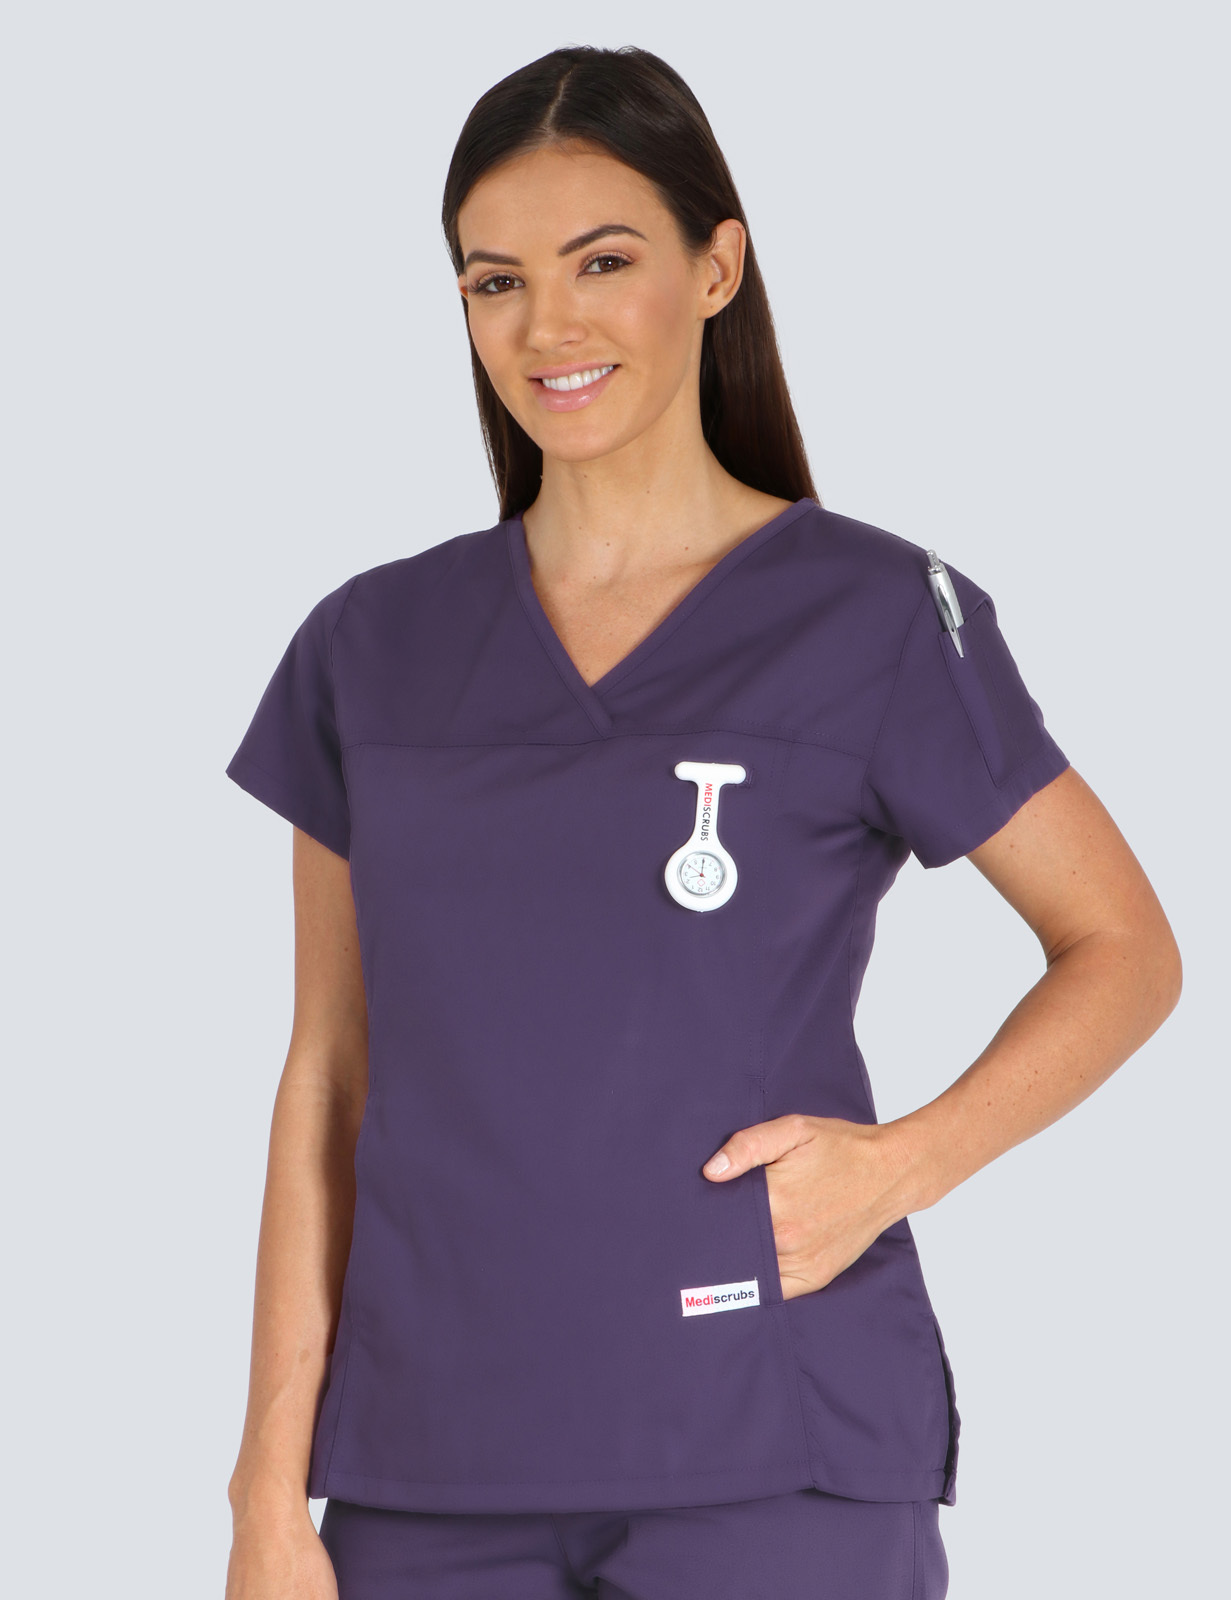 Peninsula Health - Dialysis CNS (Women's Fit Solid in Aubergine incl Logos)